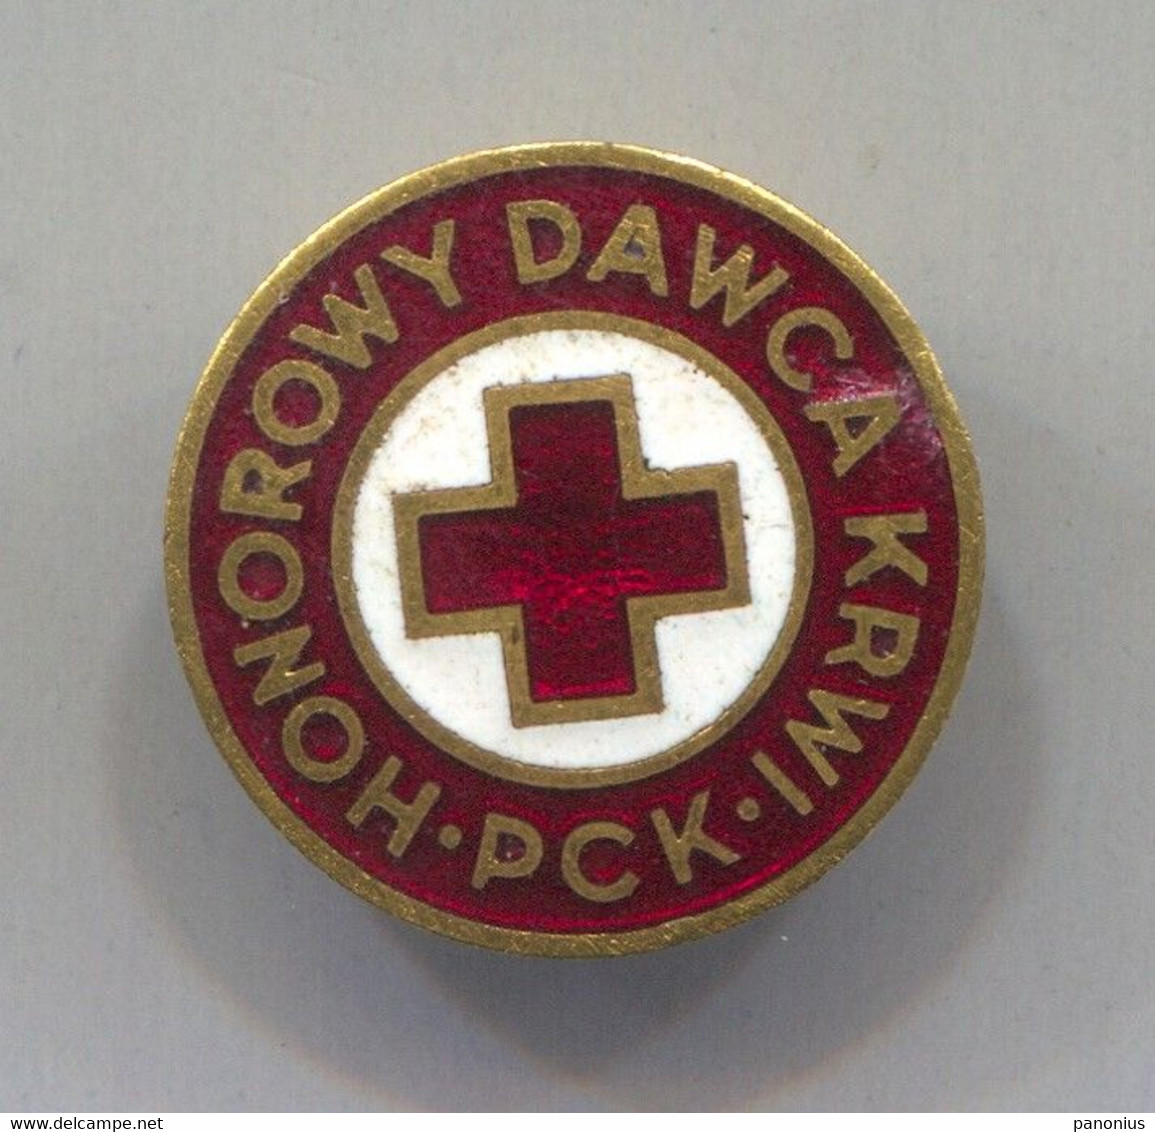 Red Cross Croix Rouge Rotes Kreuz, Honorary Blood Donor Poland, Vintage Pin Badge Abzeichen, Enamel - Médical